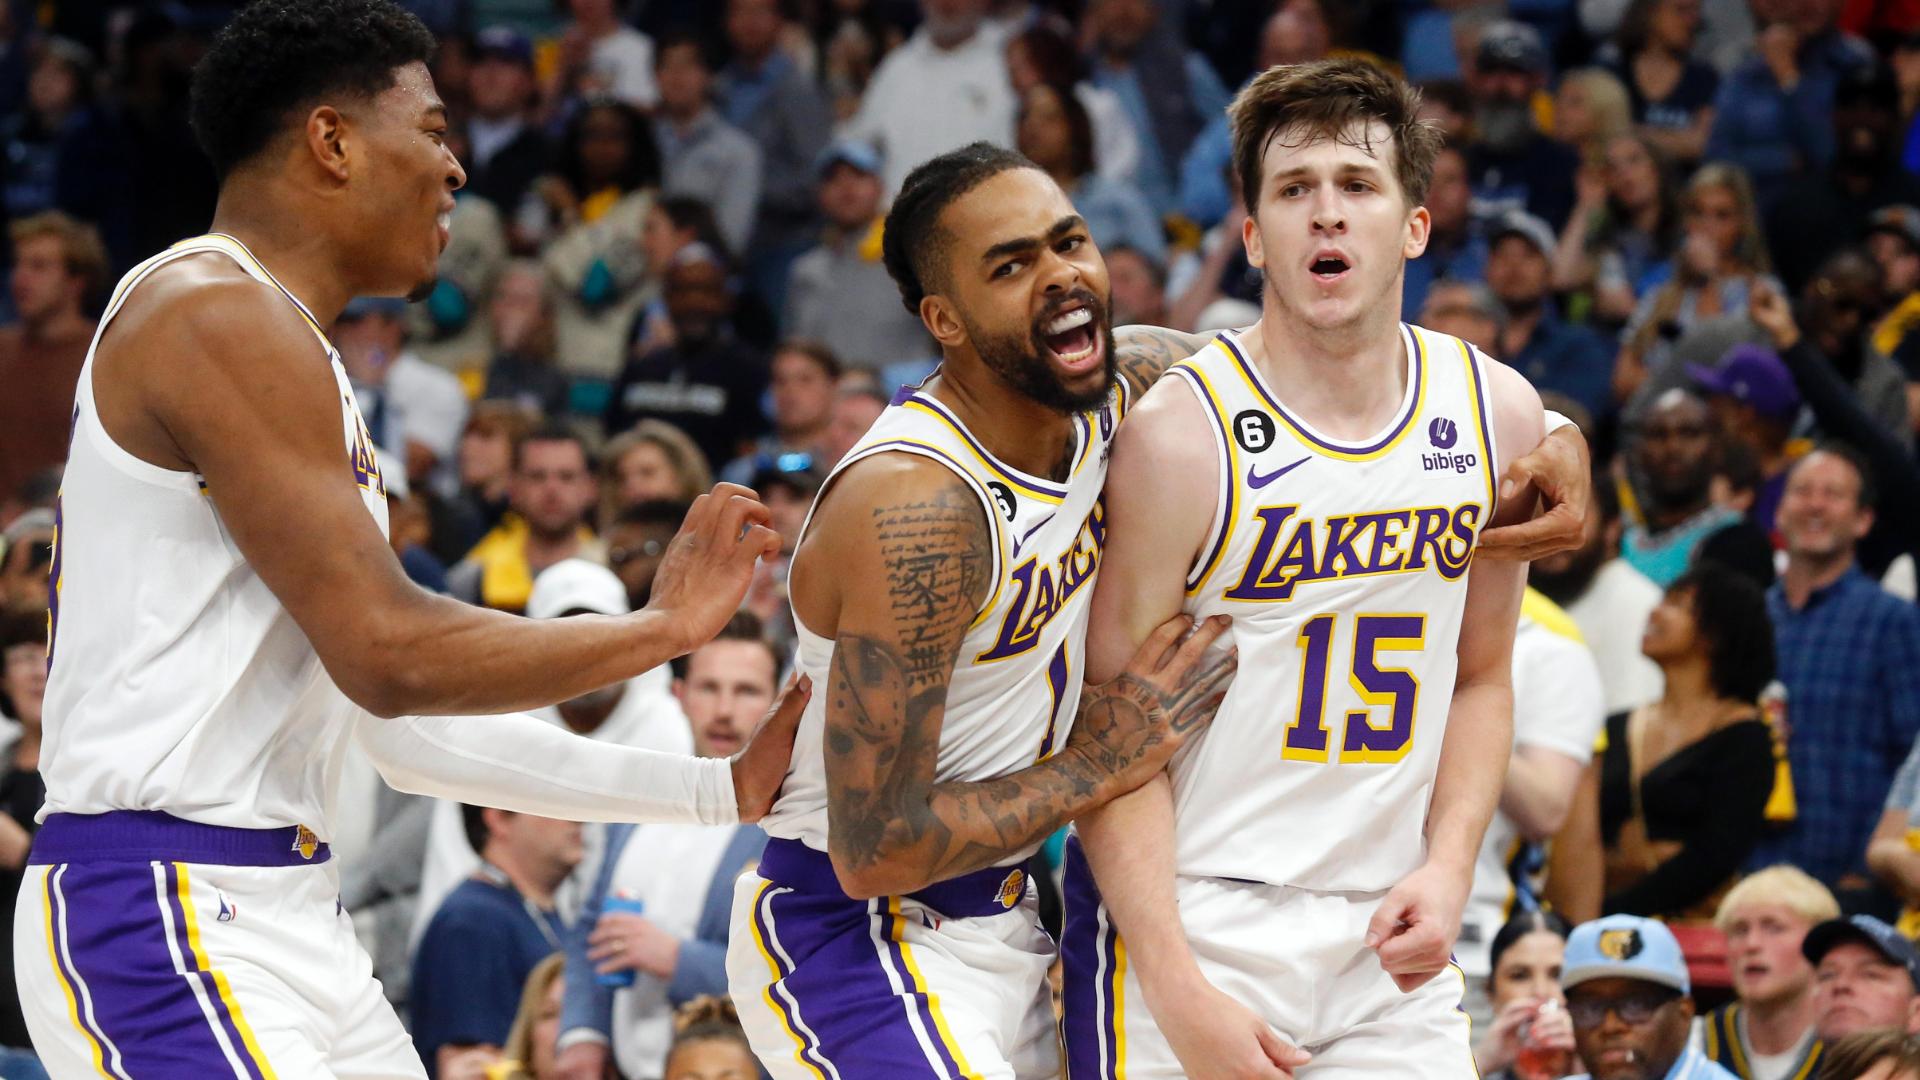 Lakers extend qualifying offers to Austin Reaves & Rui Hachimura